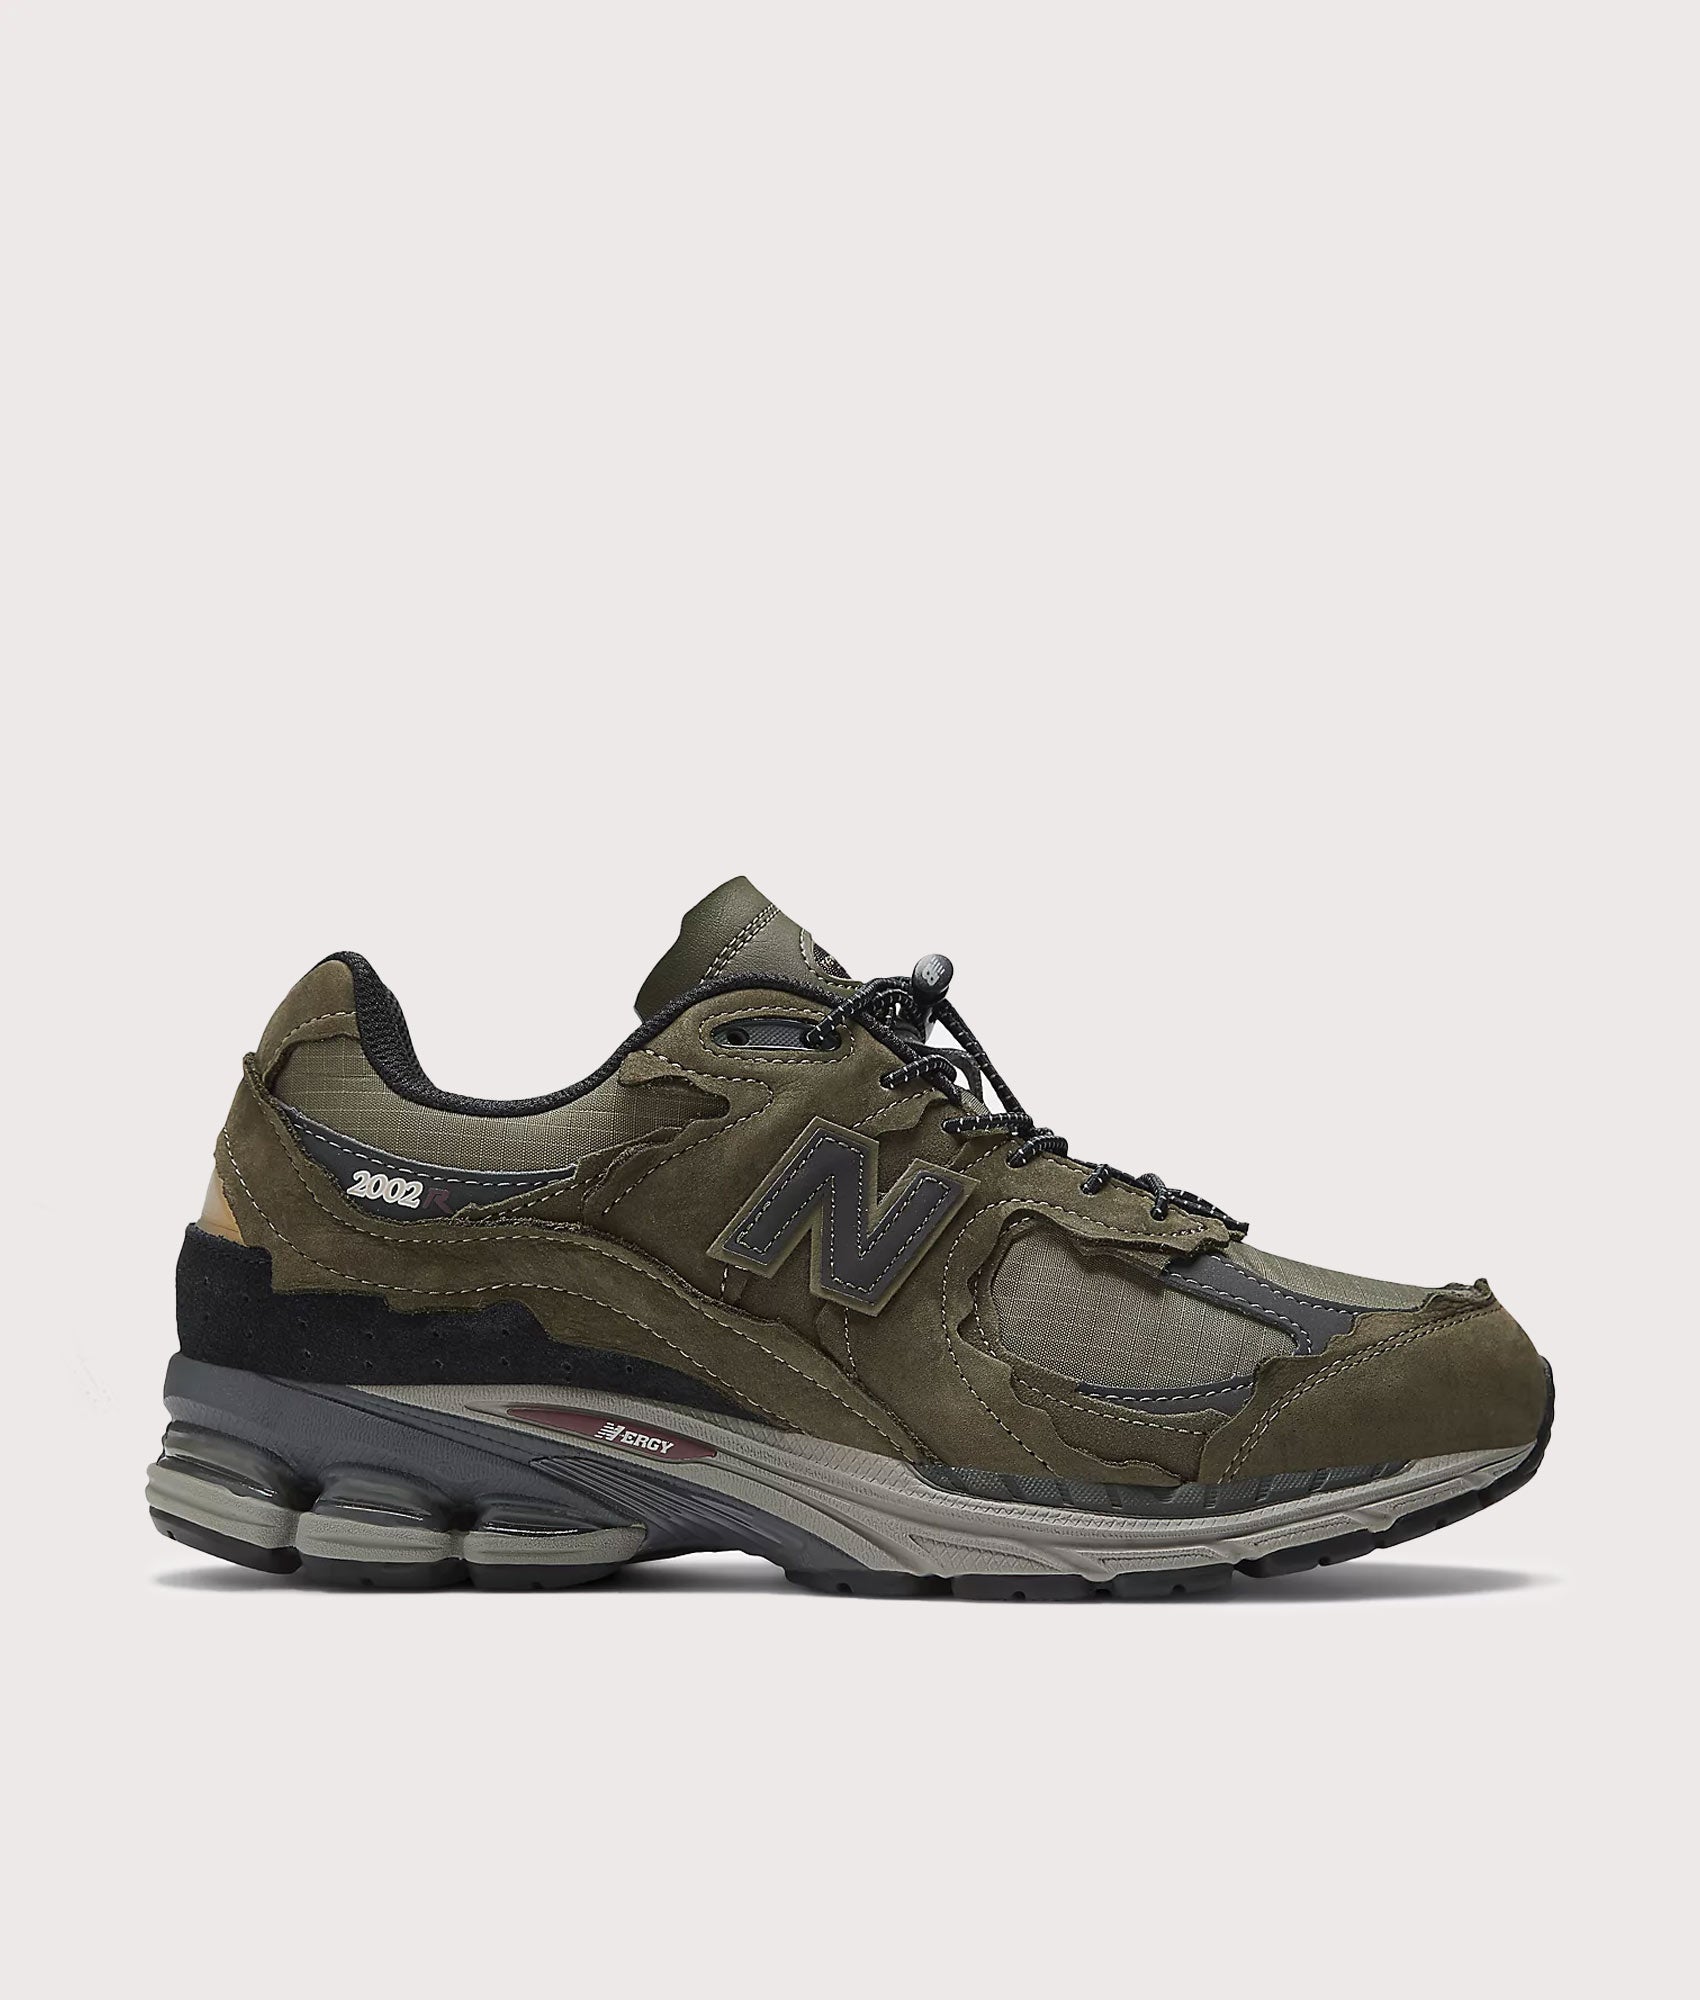 New Balance Mens 2002RD 'Protection Pack' Sneakers - Colour: M2002RDN 341 Dark Moss - Size